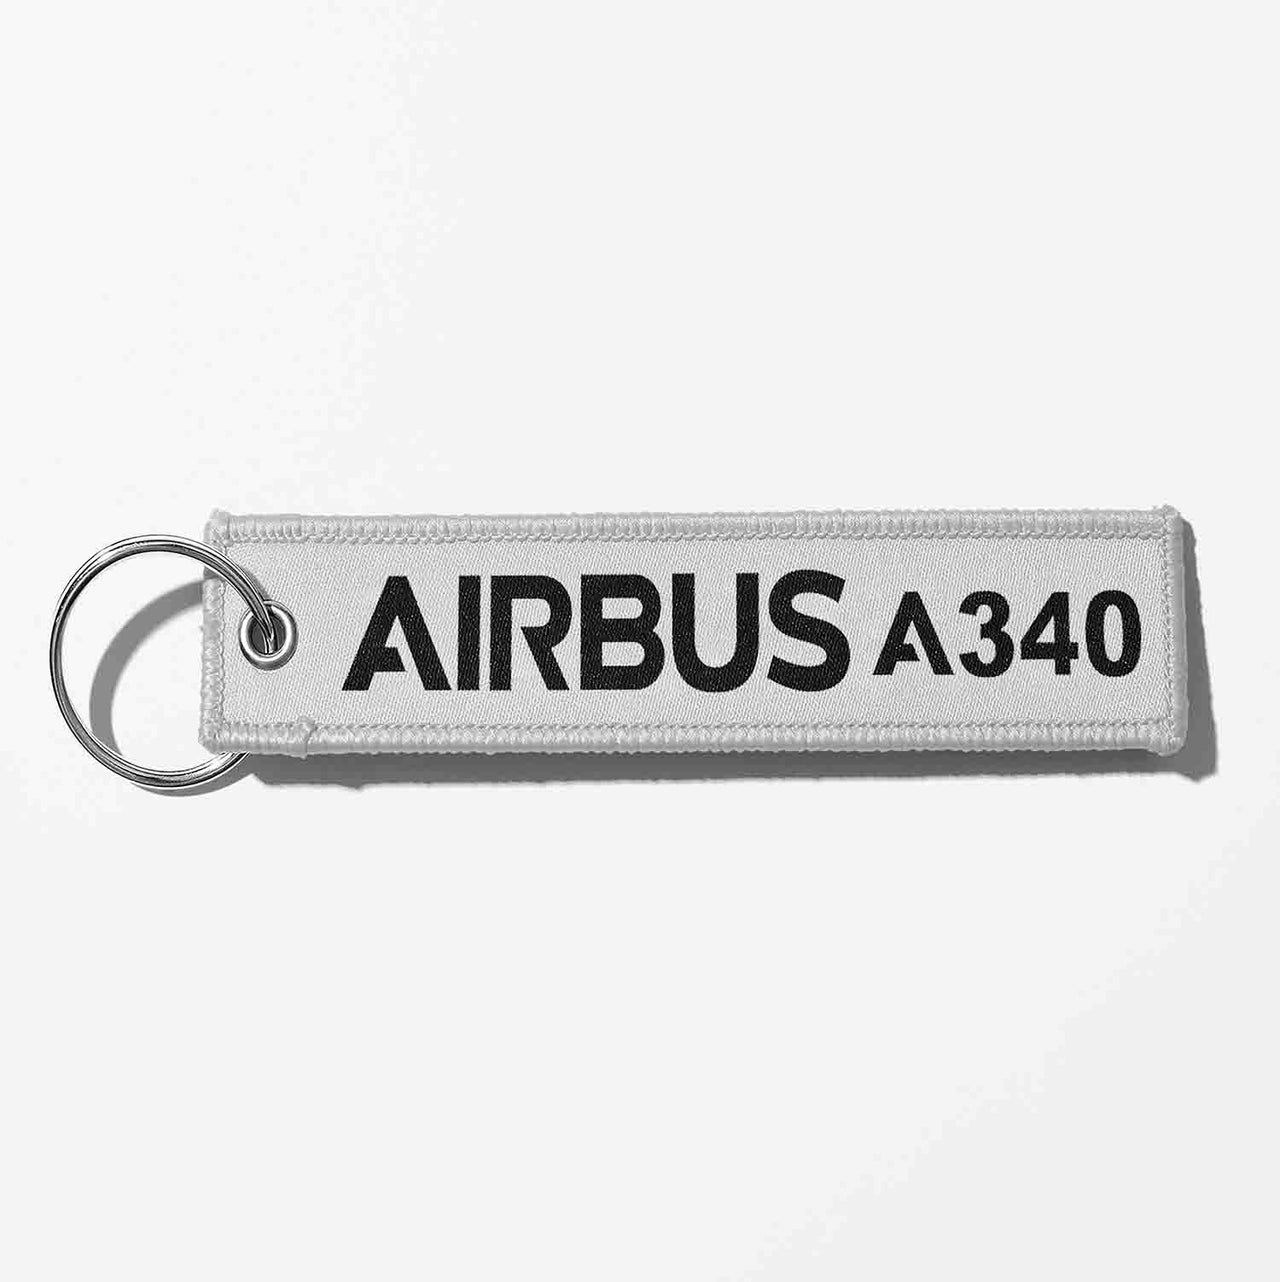 Airbus A340 & Text Designed Key Chains